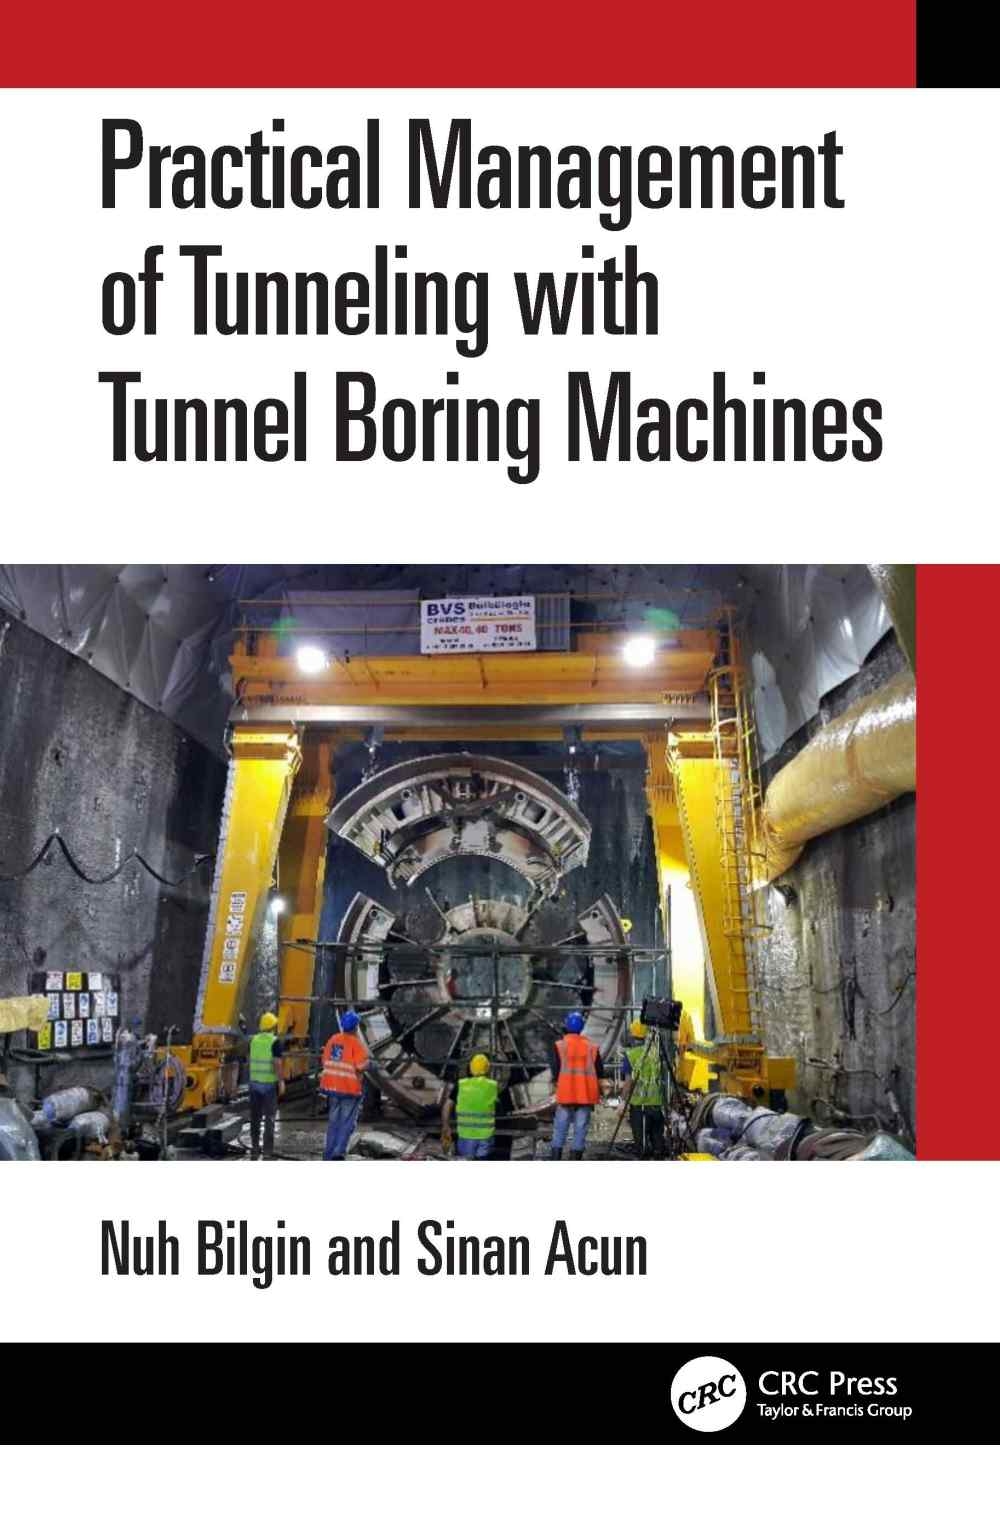 Practical Management of Tunnelling with Tunnel Boring Machines